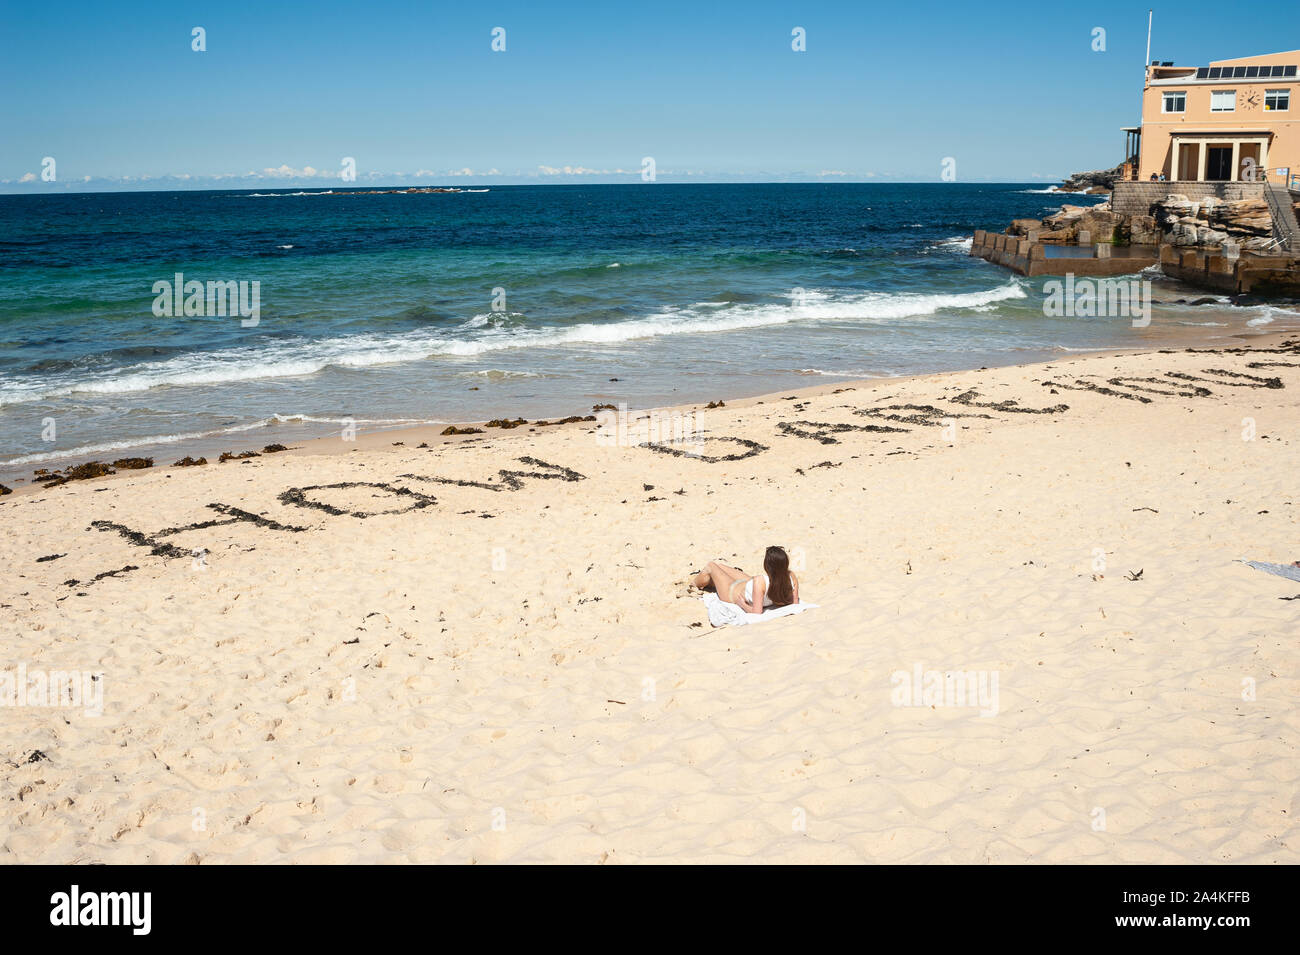 24.09.2019, Sydney, New South Wales, Australia - A woman sunbathes at Coogee Beach where the quote How Dare You? is written in the sand. Stock Photo